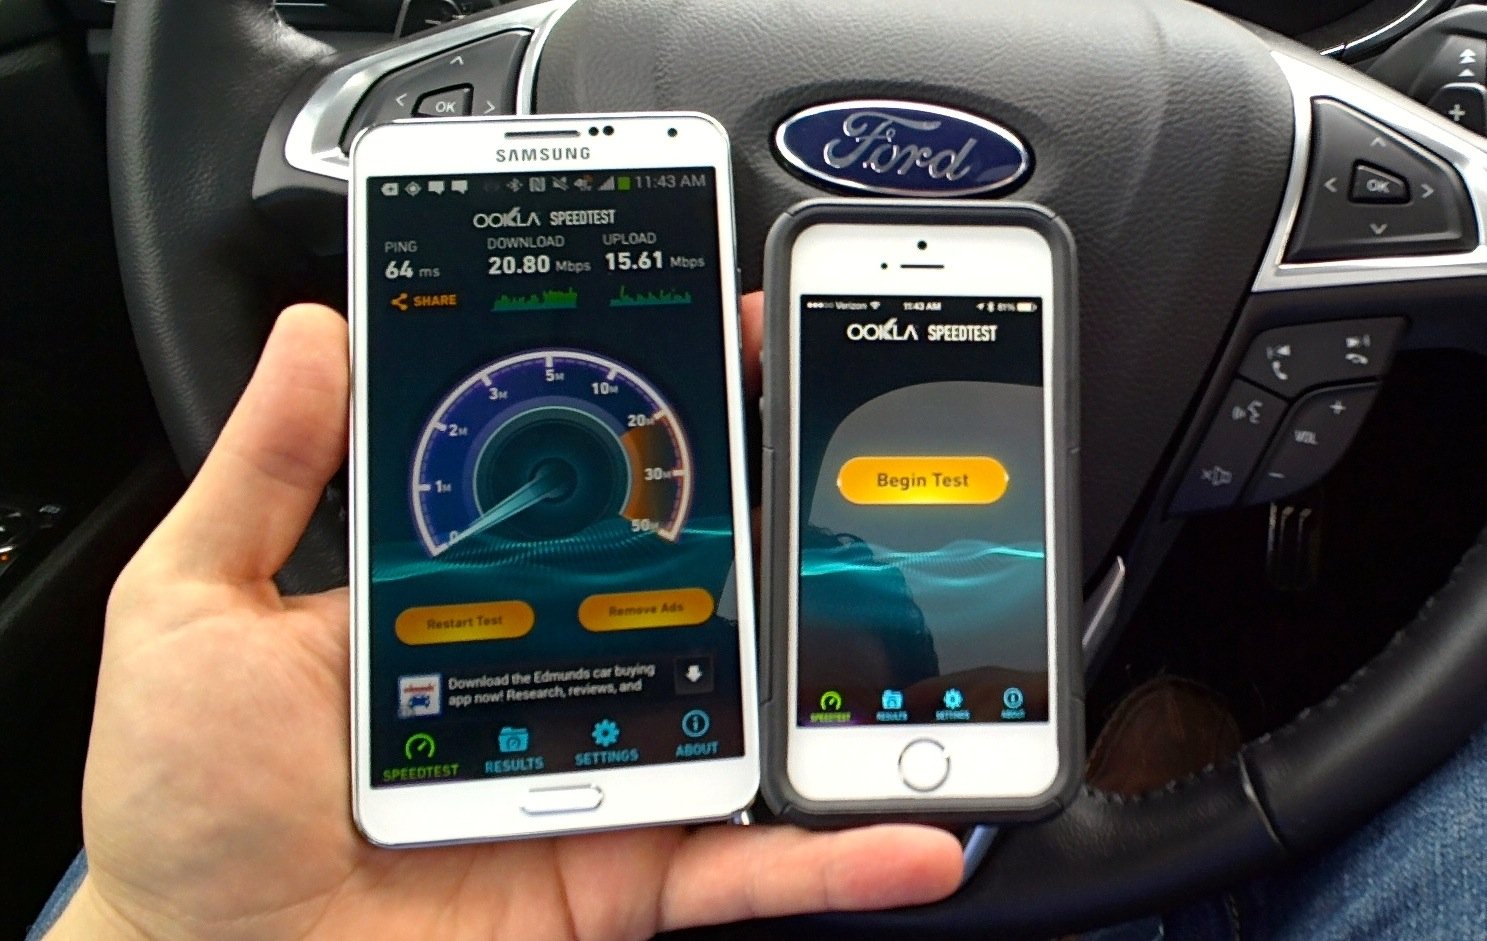 Check out the speedtest of Verizon v.s AT&T 4G LTE on the Note 3 and the iPhone 5s.